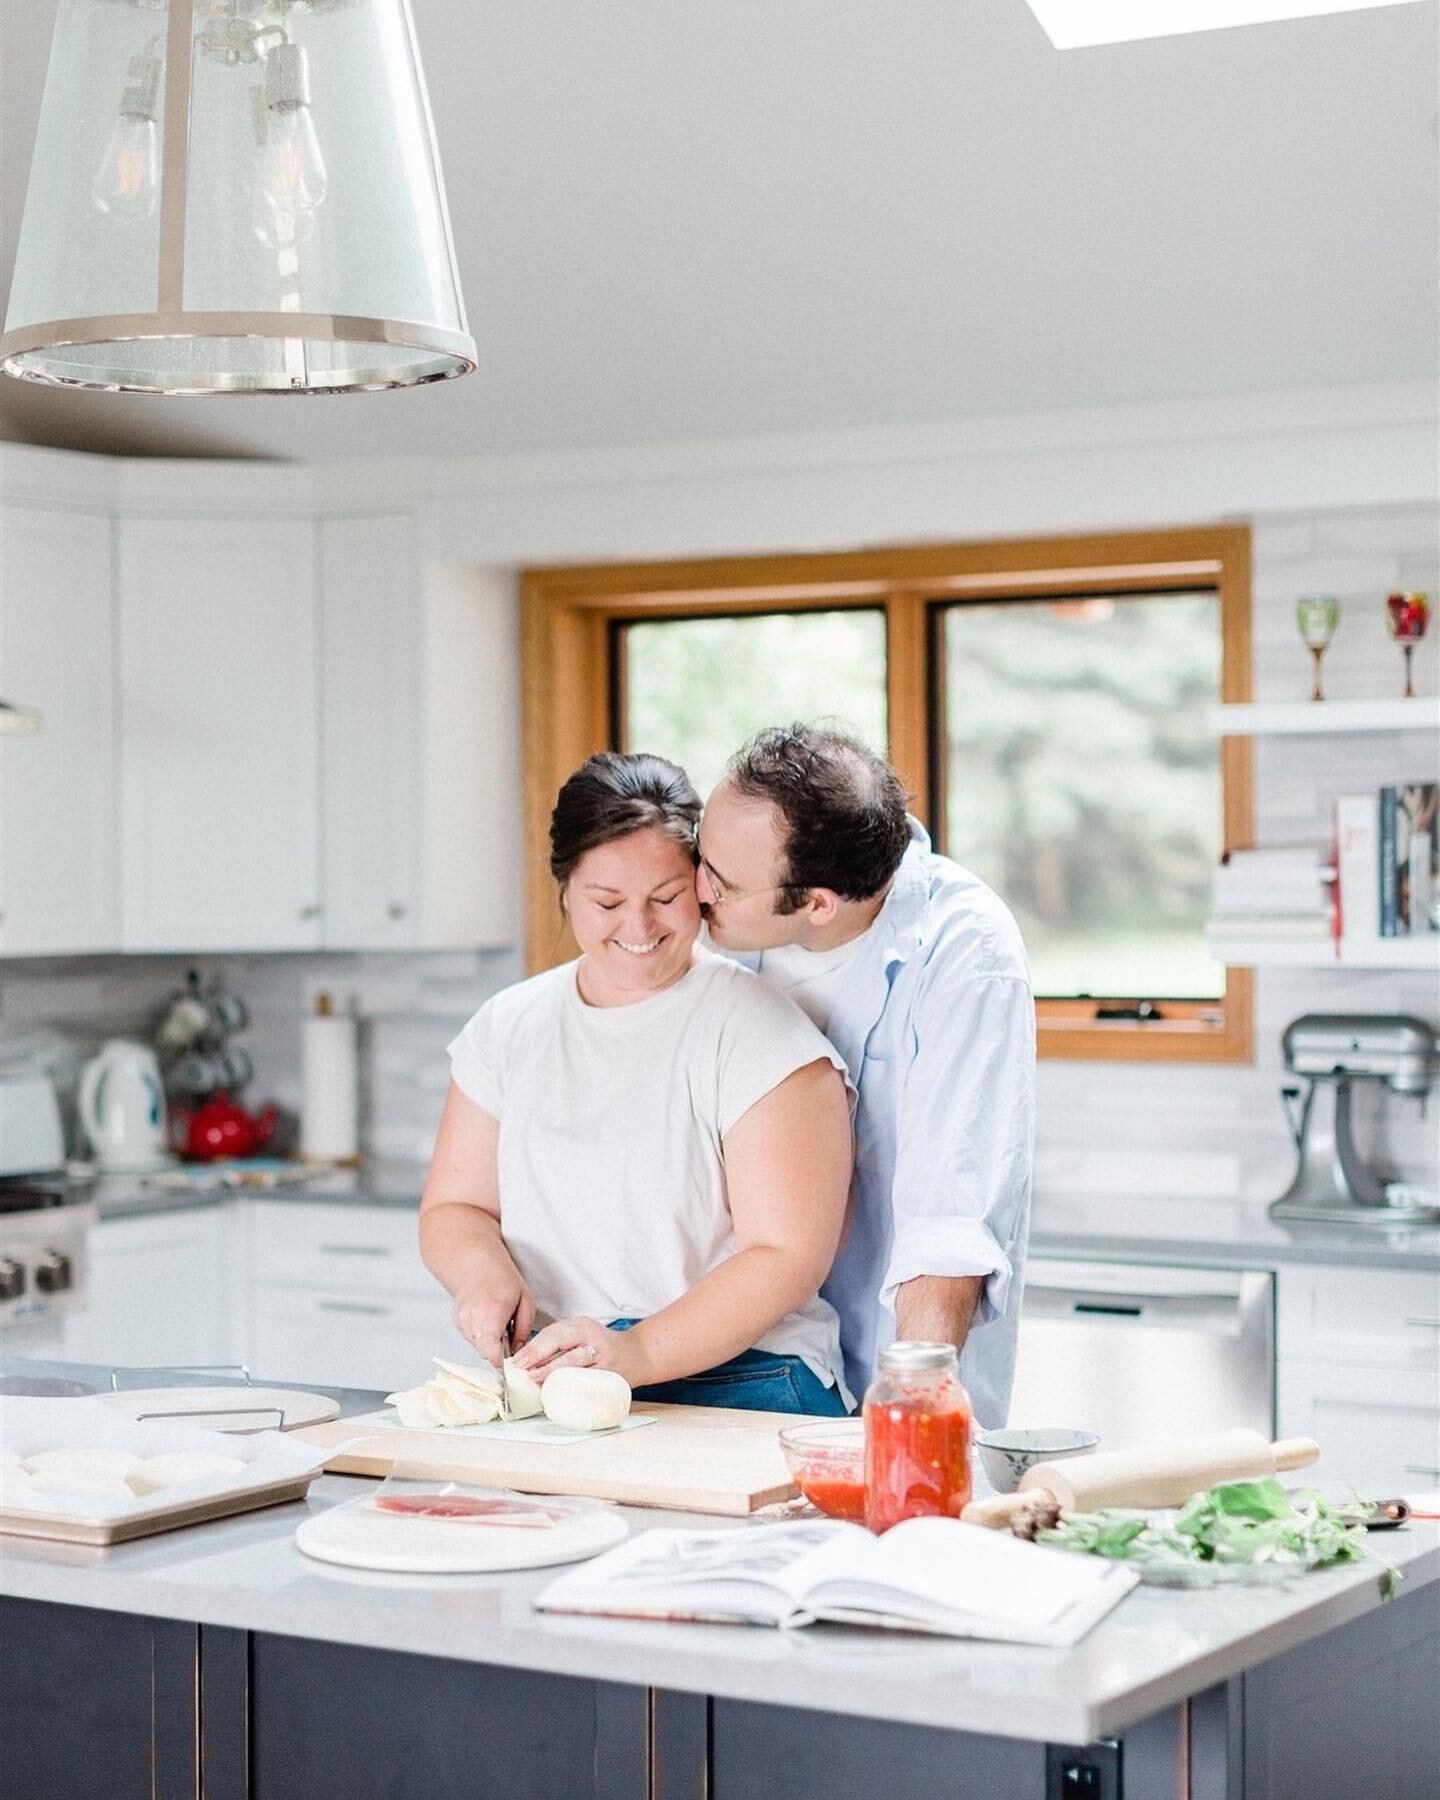 They went to the cottage, made homemade pizza, danced around the kitchen, snuggled their handsome pup while the pizza baked, and ate dinner on the porch overlooking the forest.  This engagement session was 10/10, and it was effortless to both shoot A